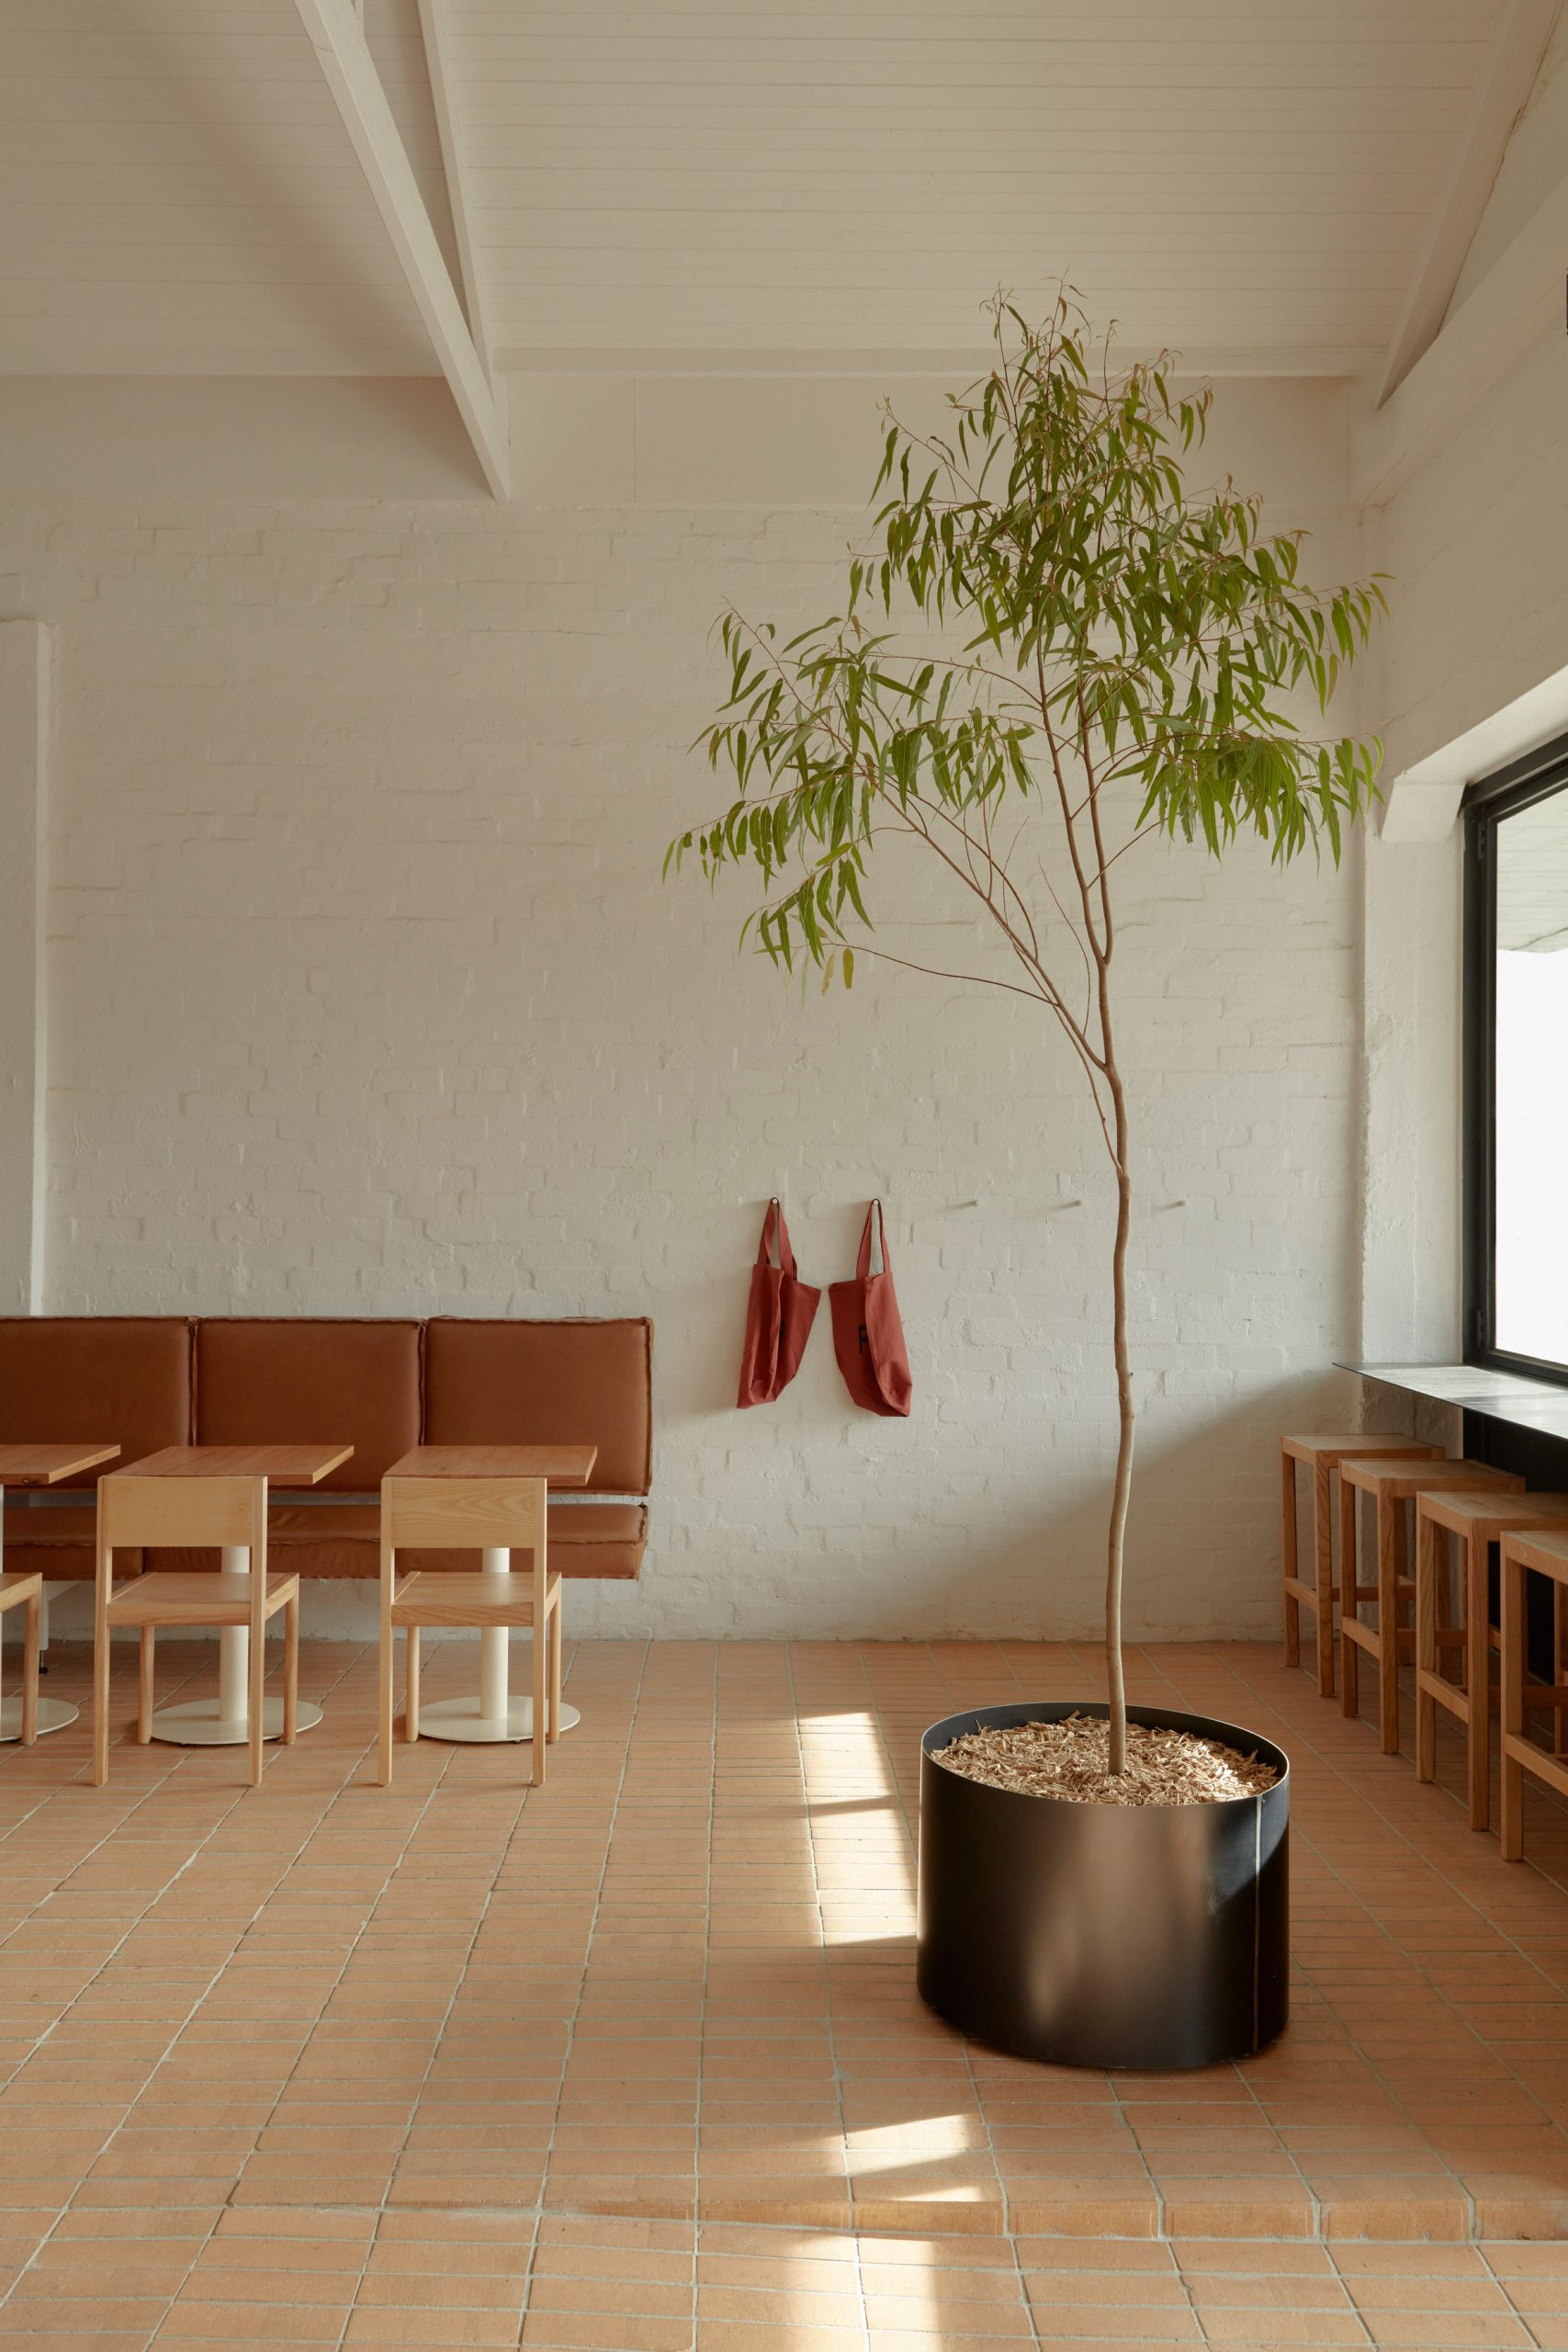 Prior cafe in Melbourne features brick-lined interiors